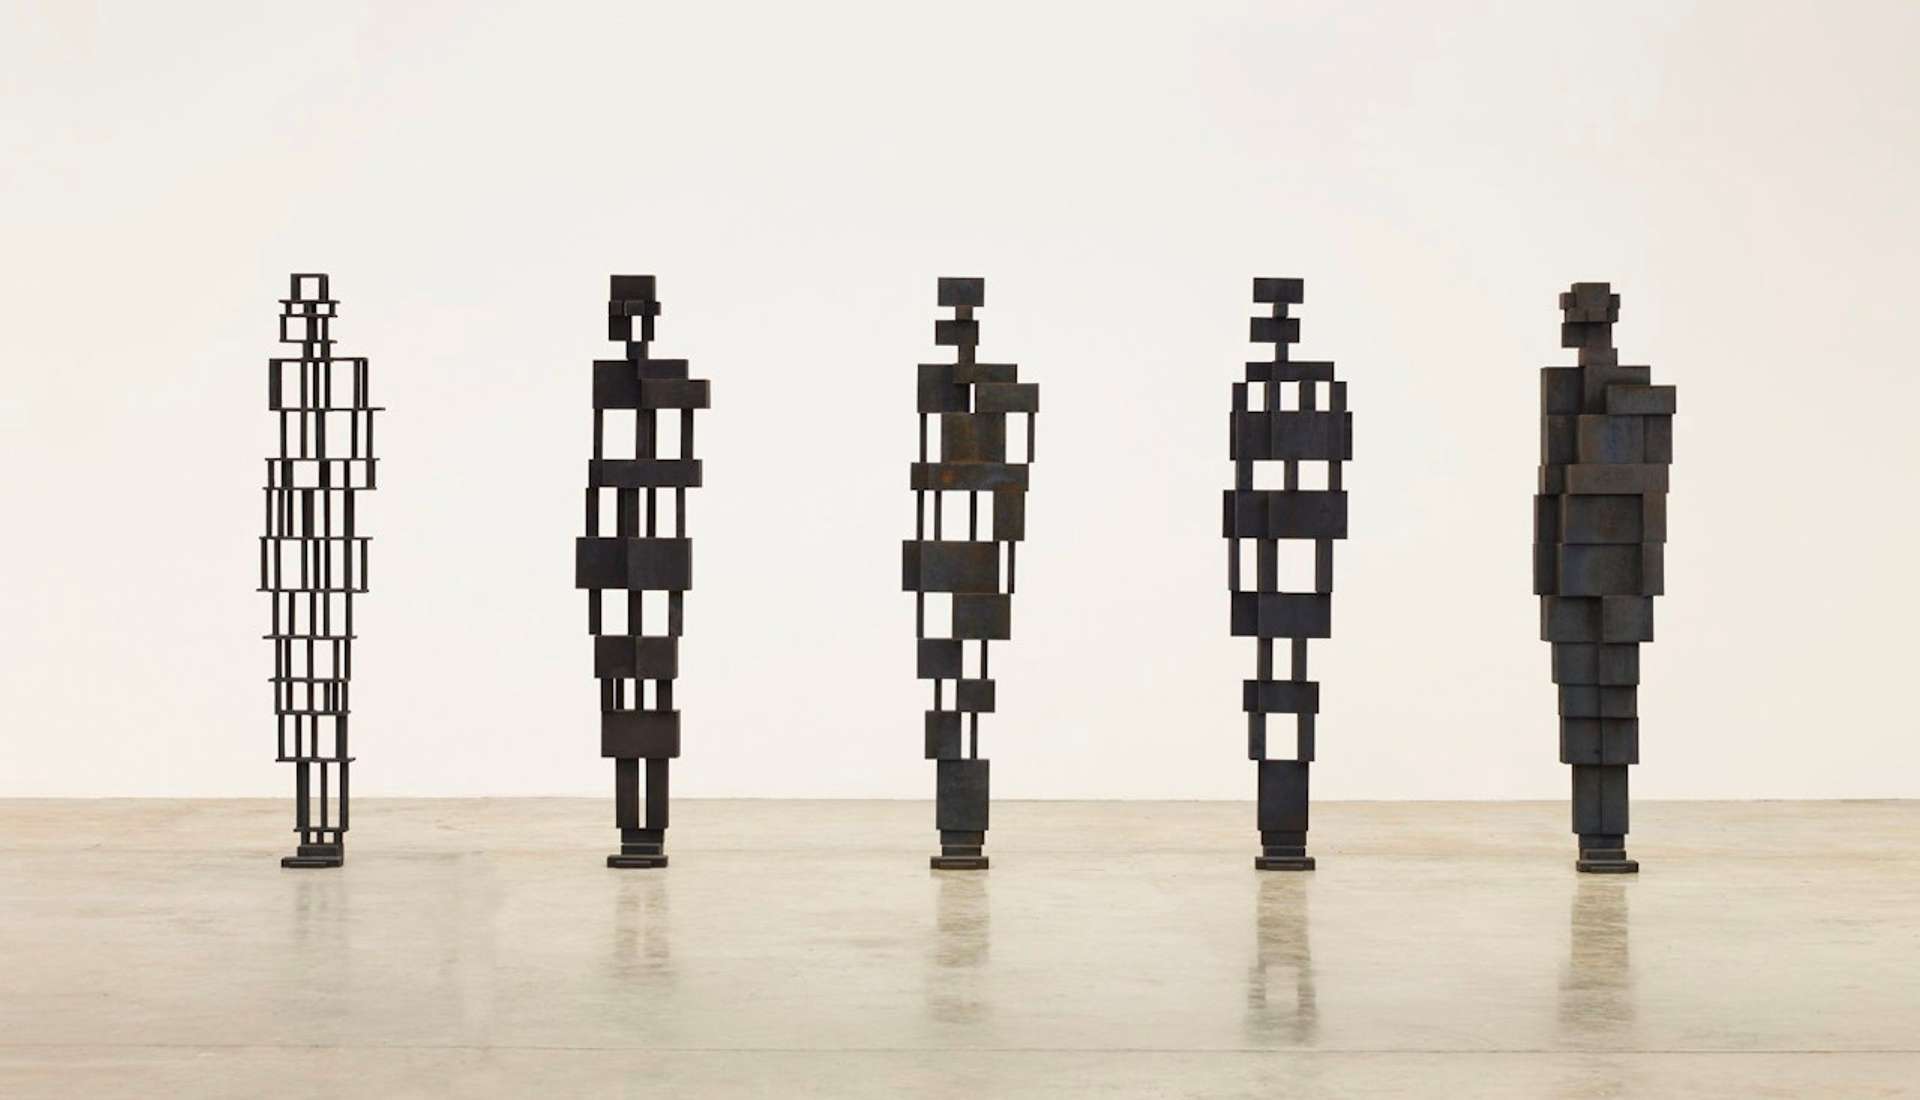 Five freestanding sculptures depicting the essence of the human form, void of specific defining characteristics. Each sculpture is crafted using different materials, ranging from sparsely interwoven elements to more densely filled volumes, creating varying degrees of texture and composition. The sculptures are photographed in an empty gallery space, showcasing their unique forms and materiality.